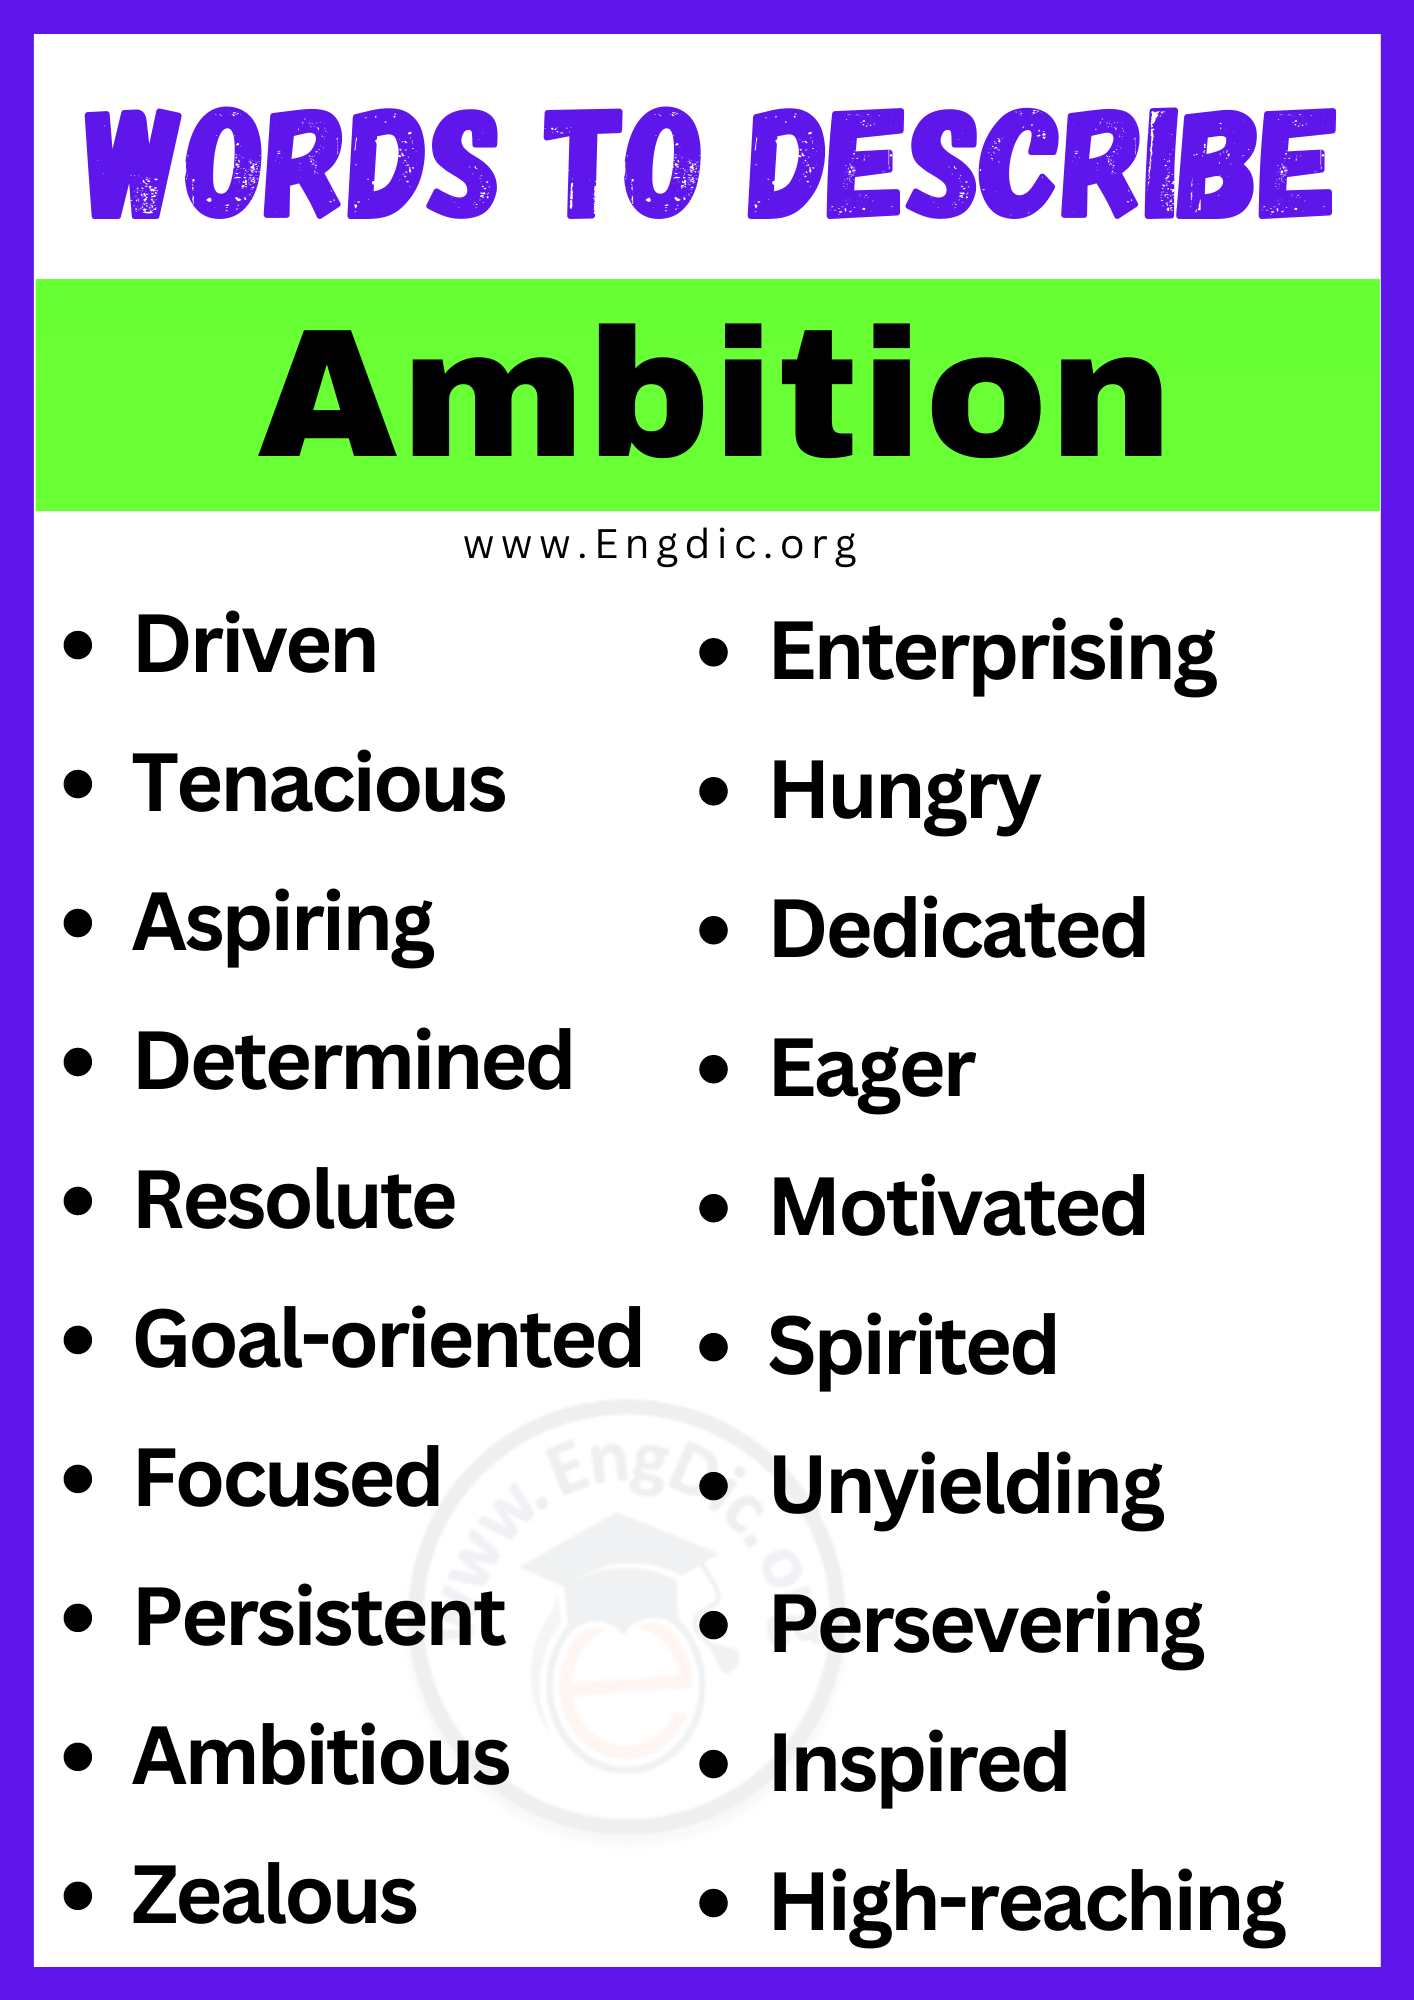 Words to Describe Ambition